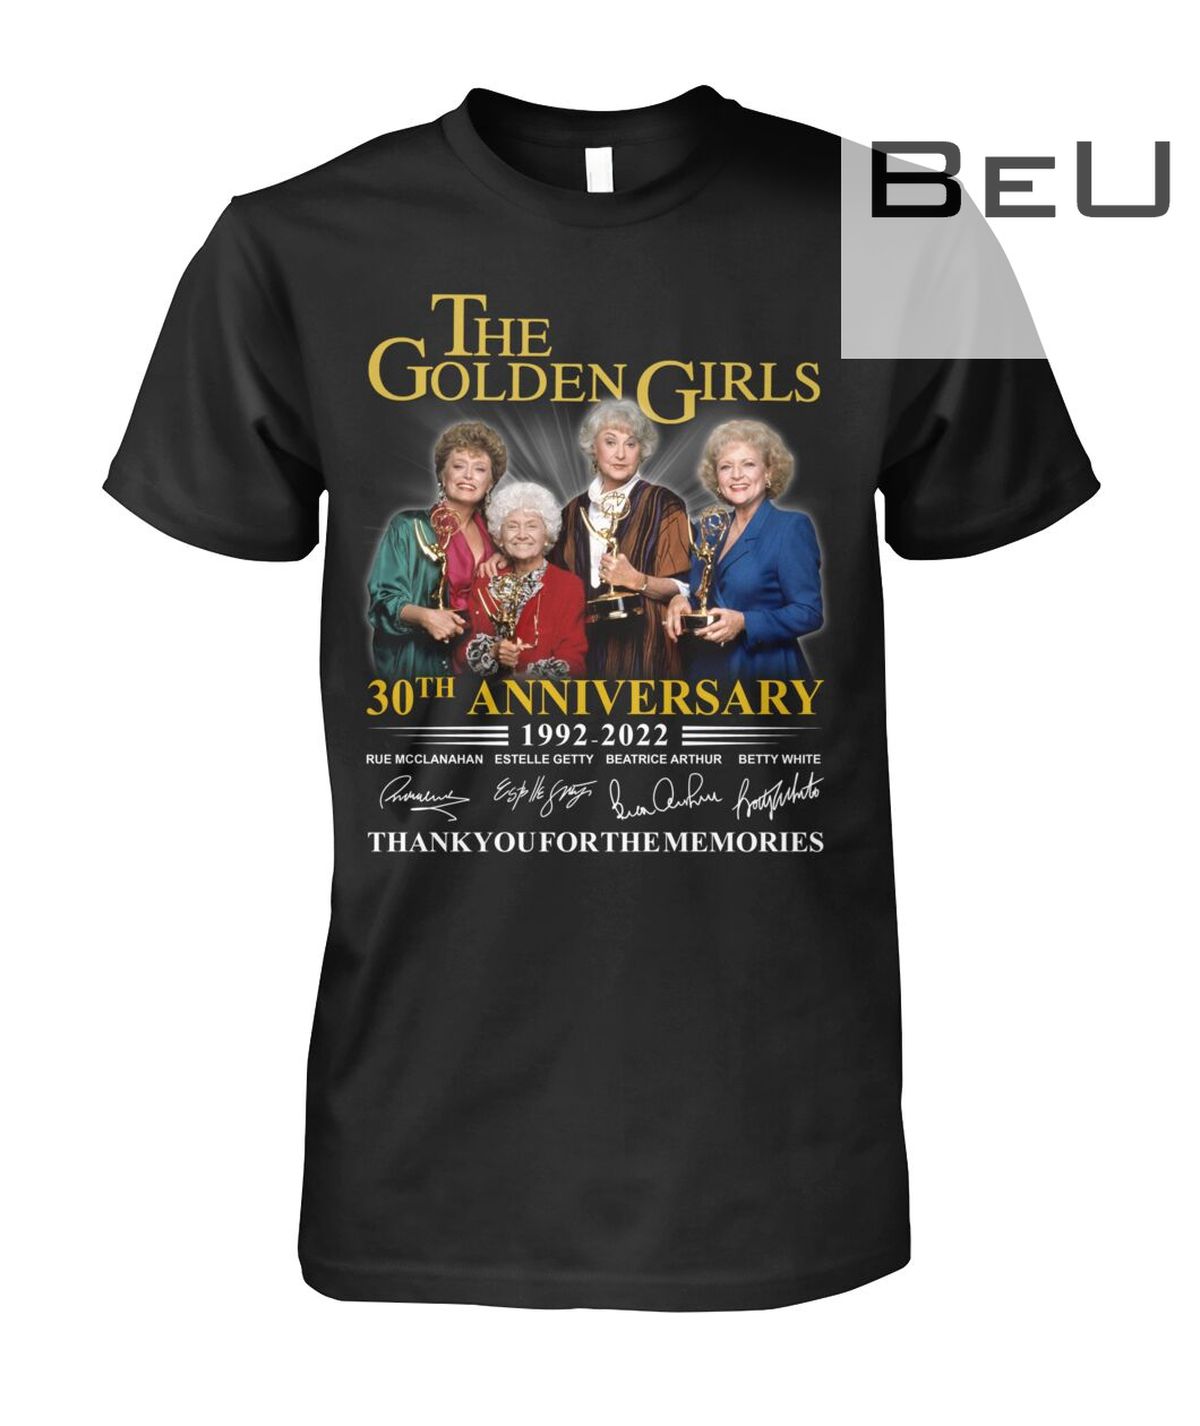 The Golden Girls 30th Anniversary 1992 2022 Thank You For The Memories Shirt